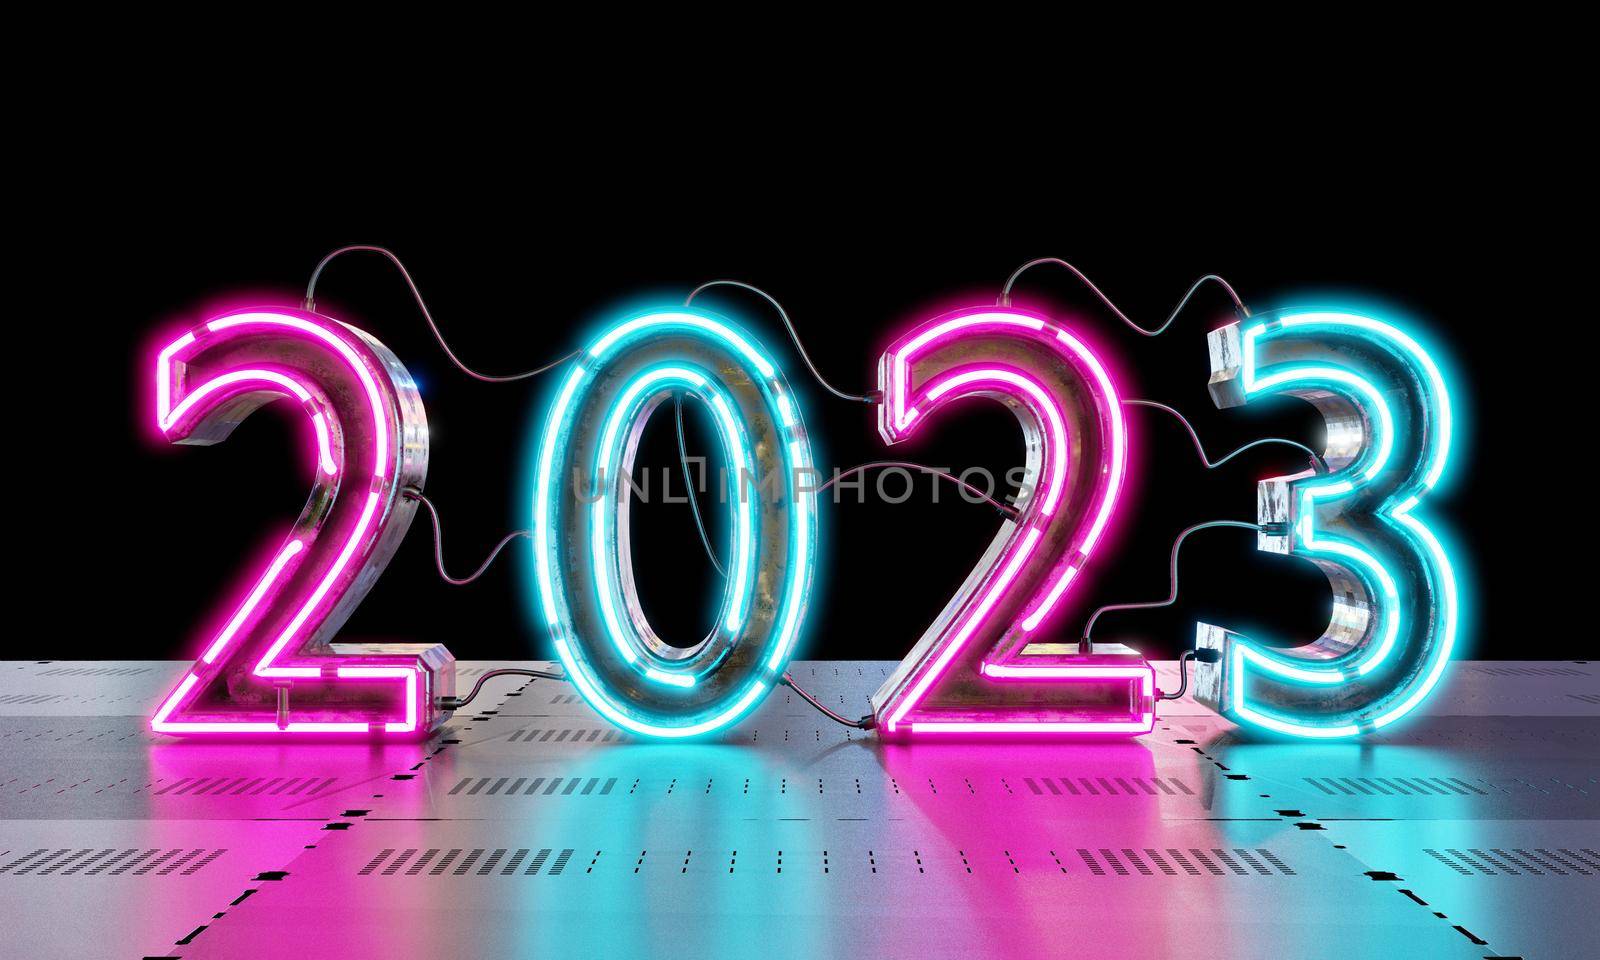 2023 neon lighting on metallic floor background. Technology and Abstract wallpaper concept. Happy new year theme. 3d illustration rendering by MiniStocker